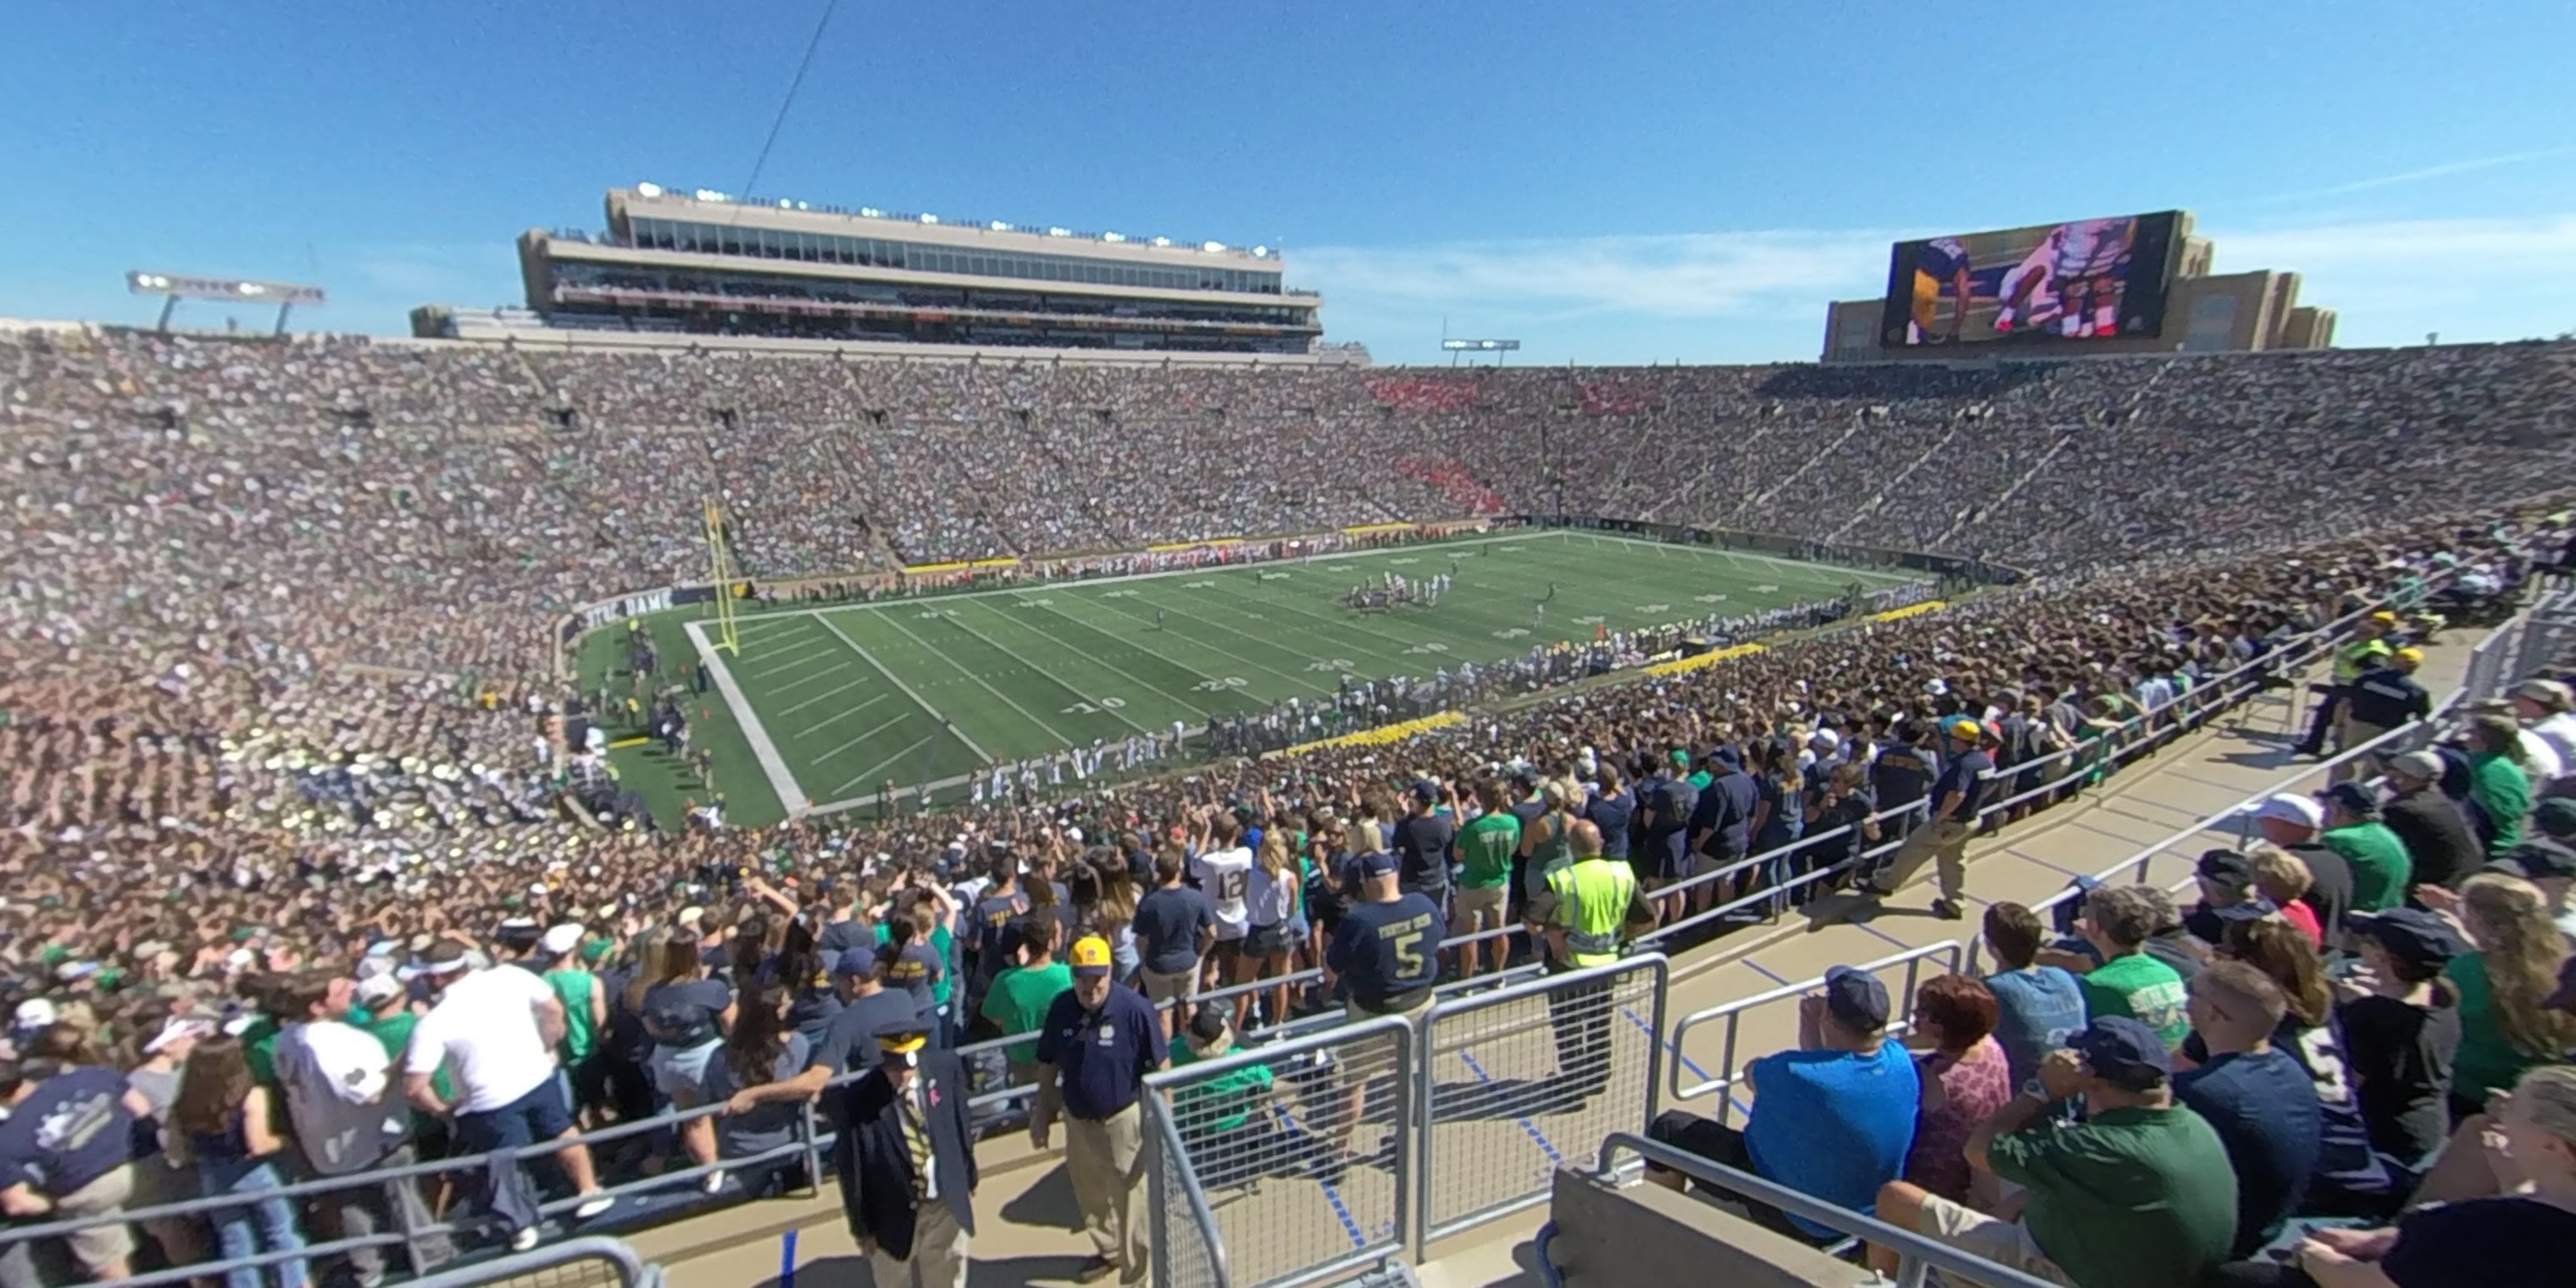 section 131 panoramic seat view  - notre dame stadium